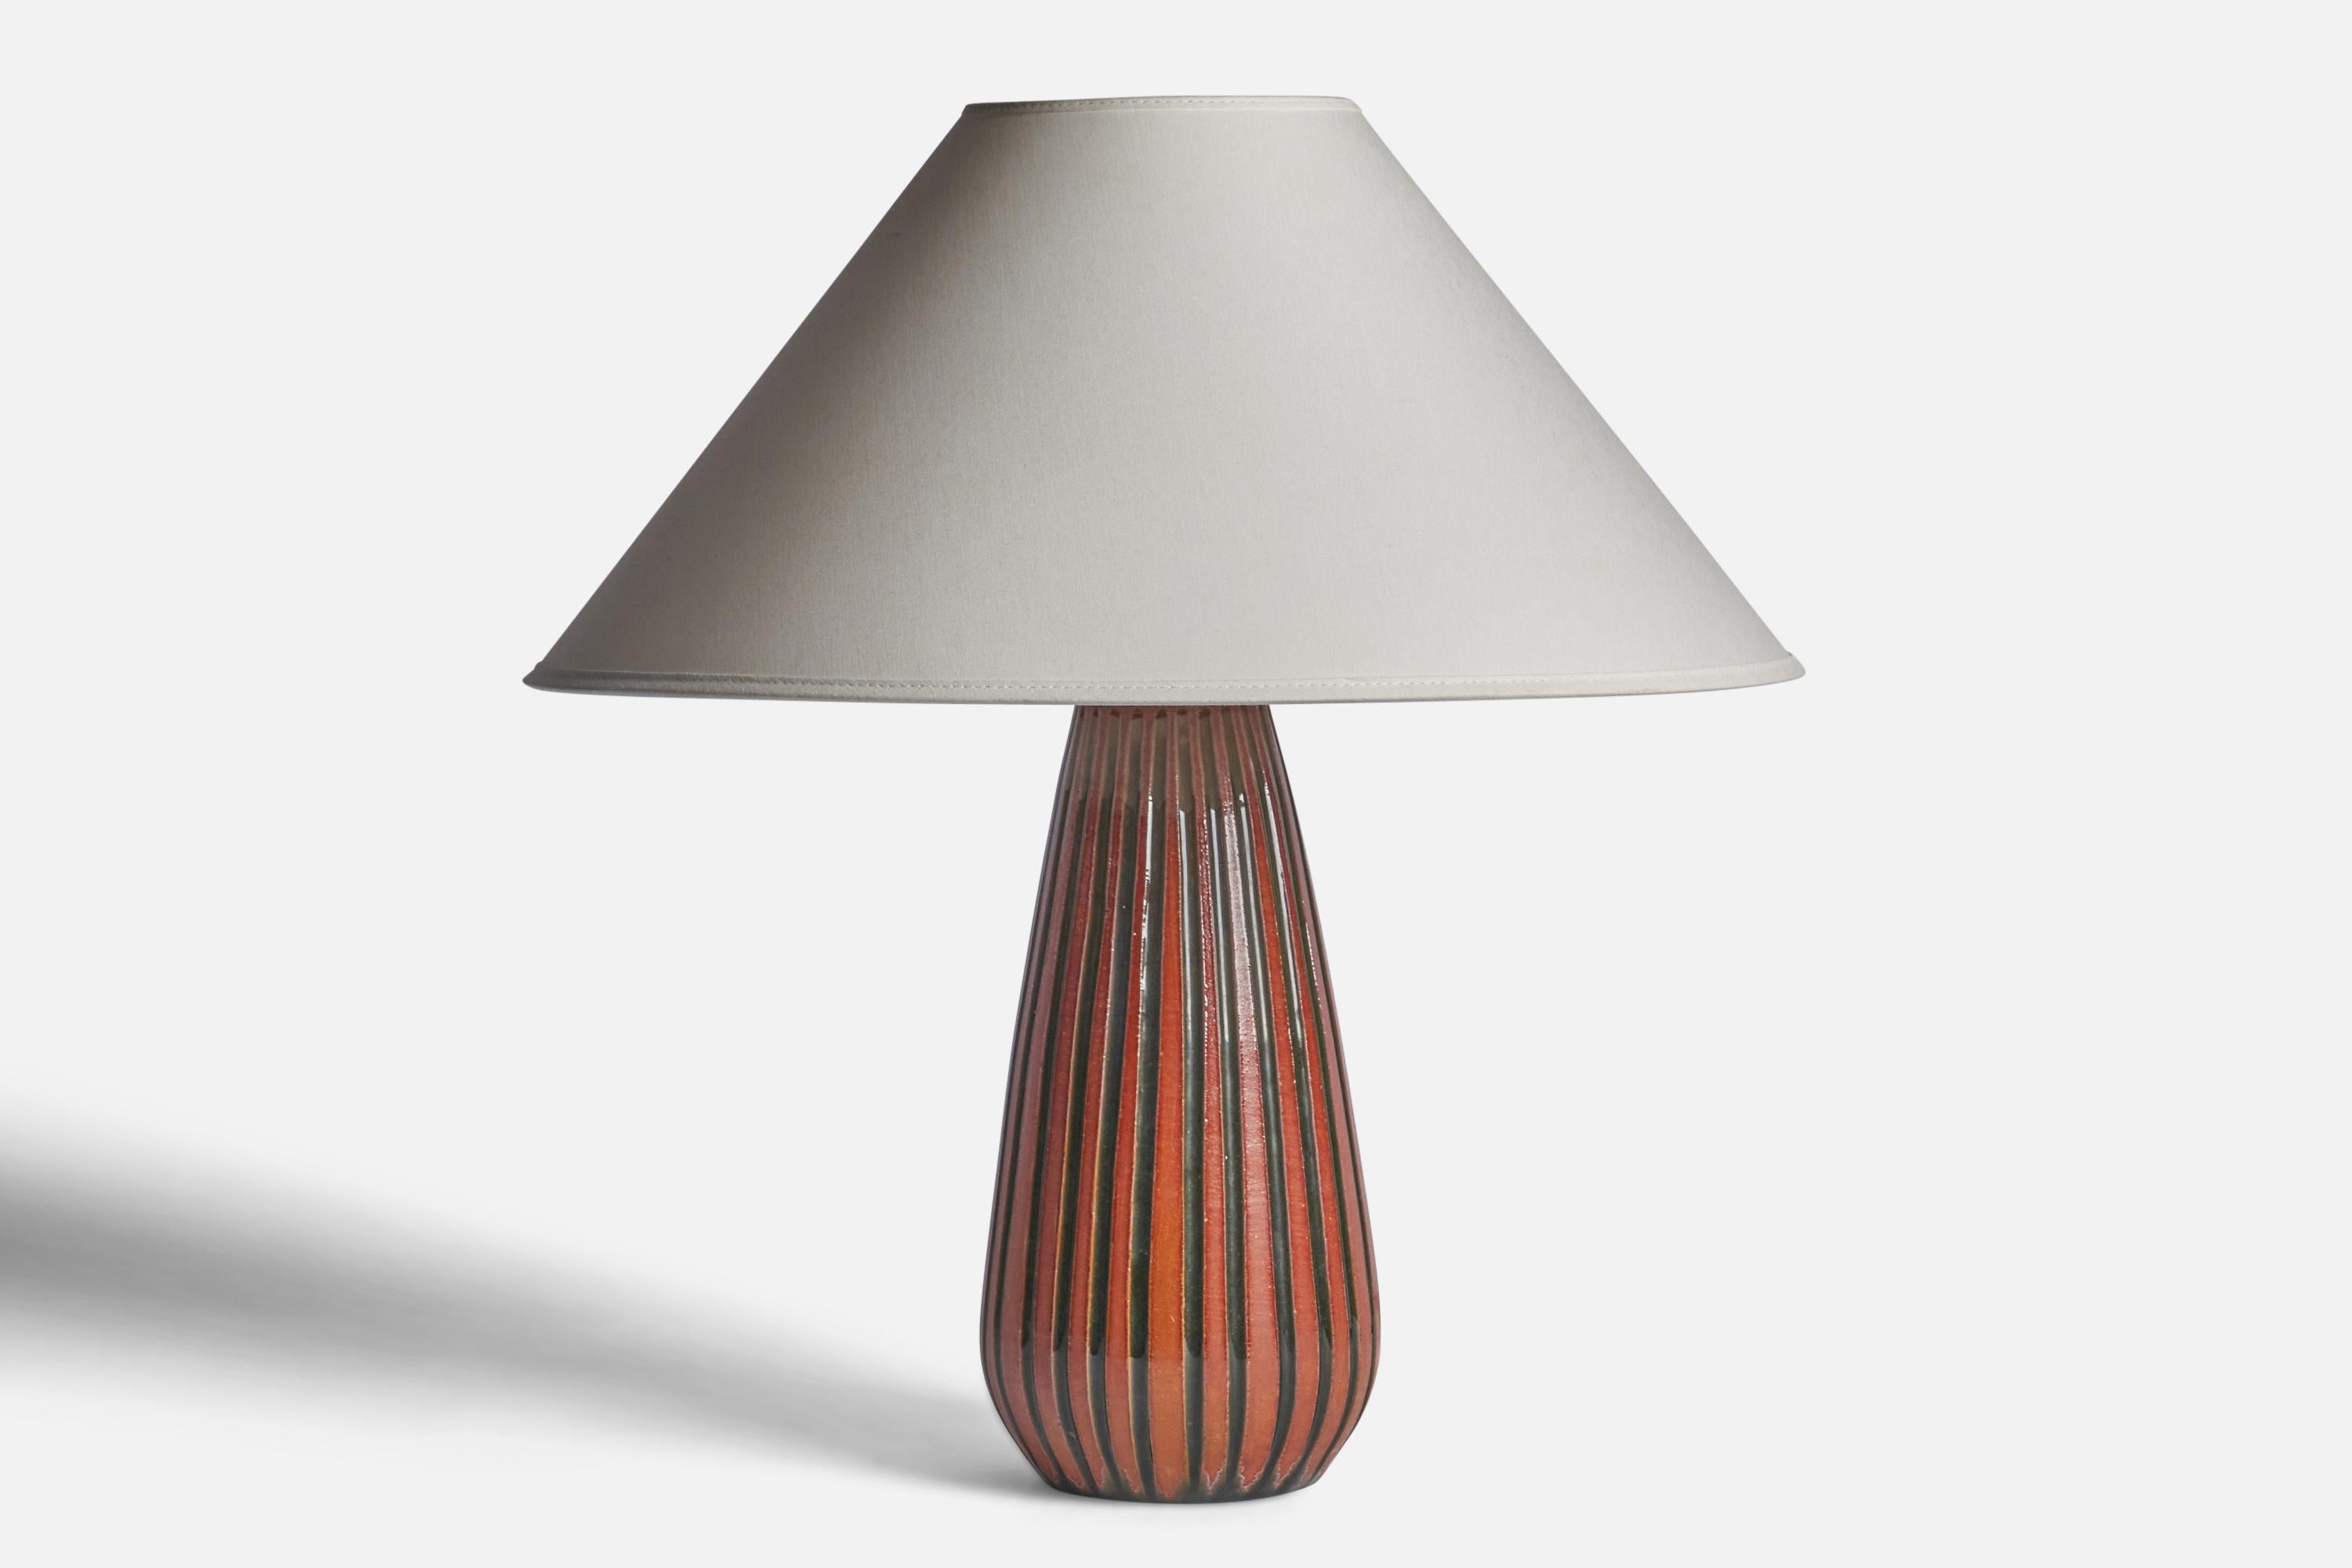 An orange and black-glazed earthenware table lamp designed by Ingrid Atterberg and produced by Upsala Ekeby, Sweden, 1950s.

Dimensions of Lamp (inches): 12.5” H x 5” Diameter
Dimensions of Shade (inches): 4.5” Top Diameter x 16” Bottom Diameter x